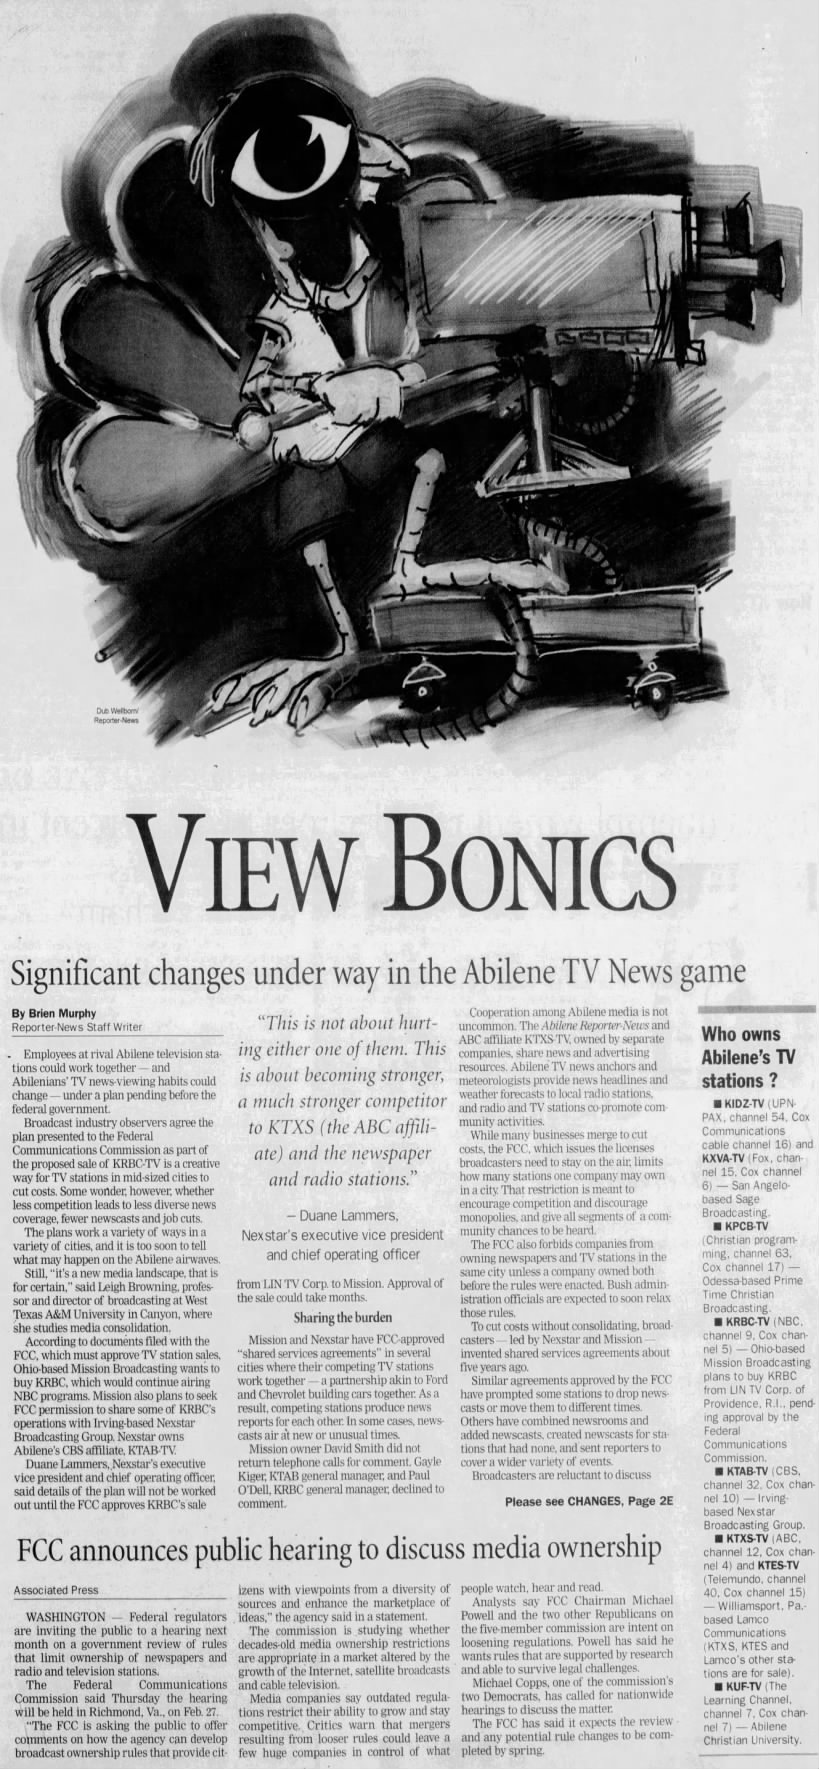 View Bonics: Significant changes under way in the Abilene TV News game